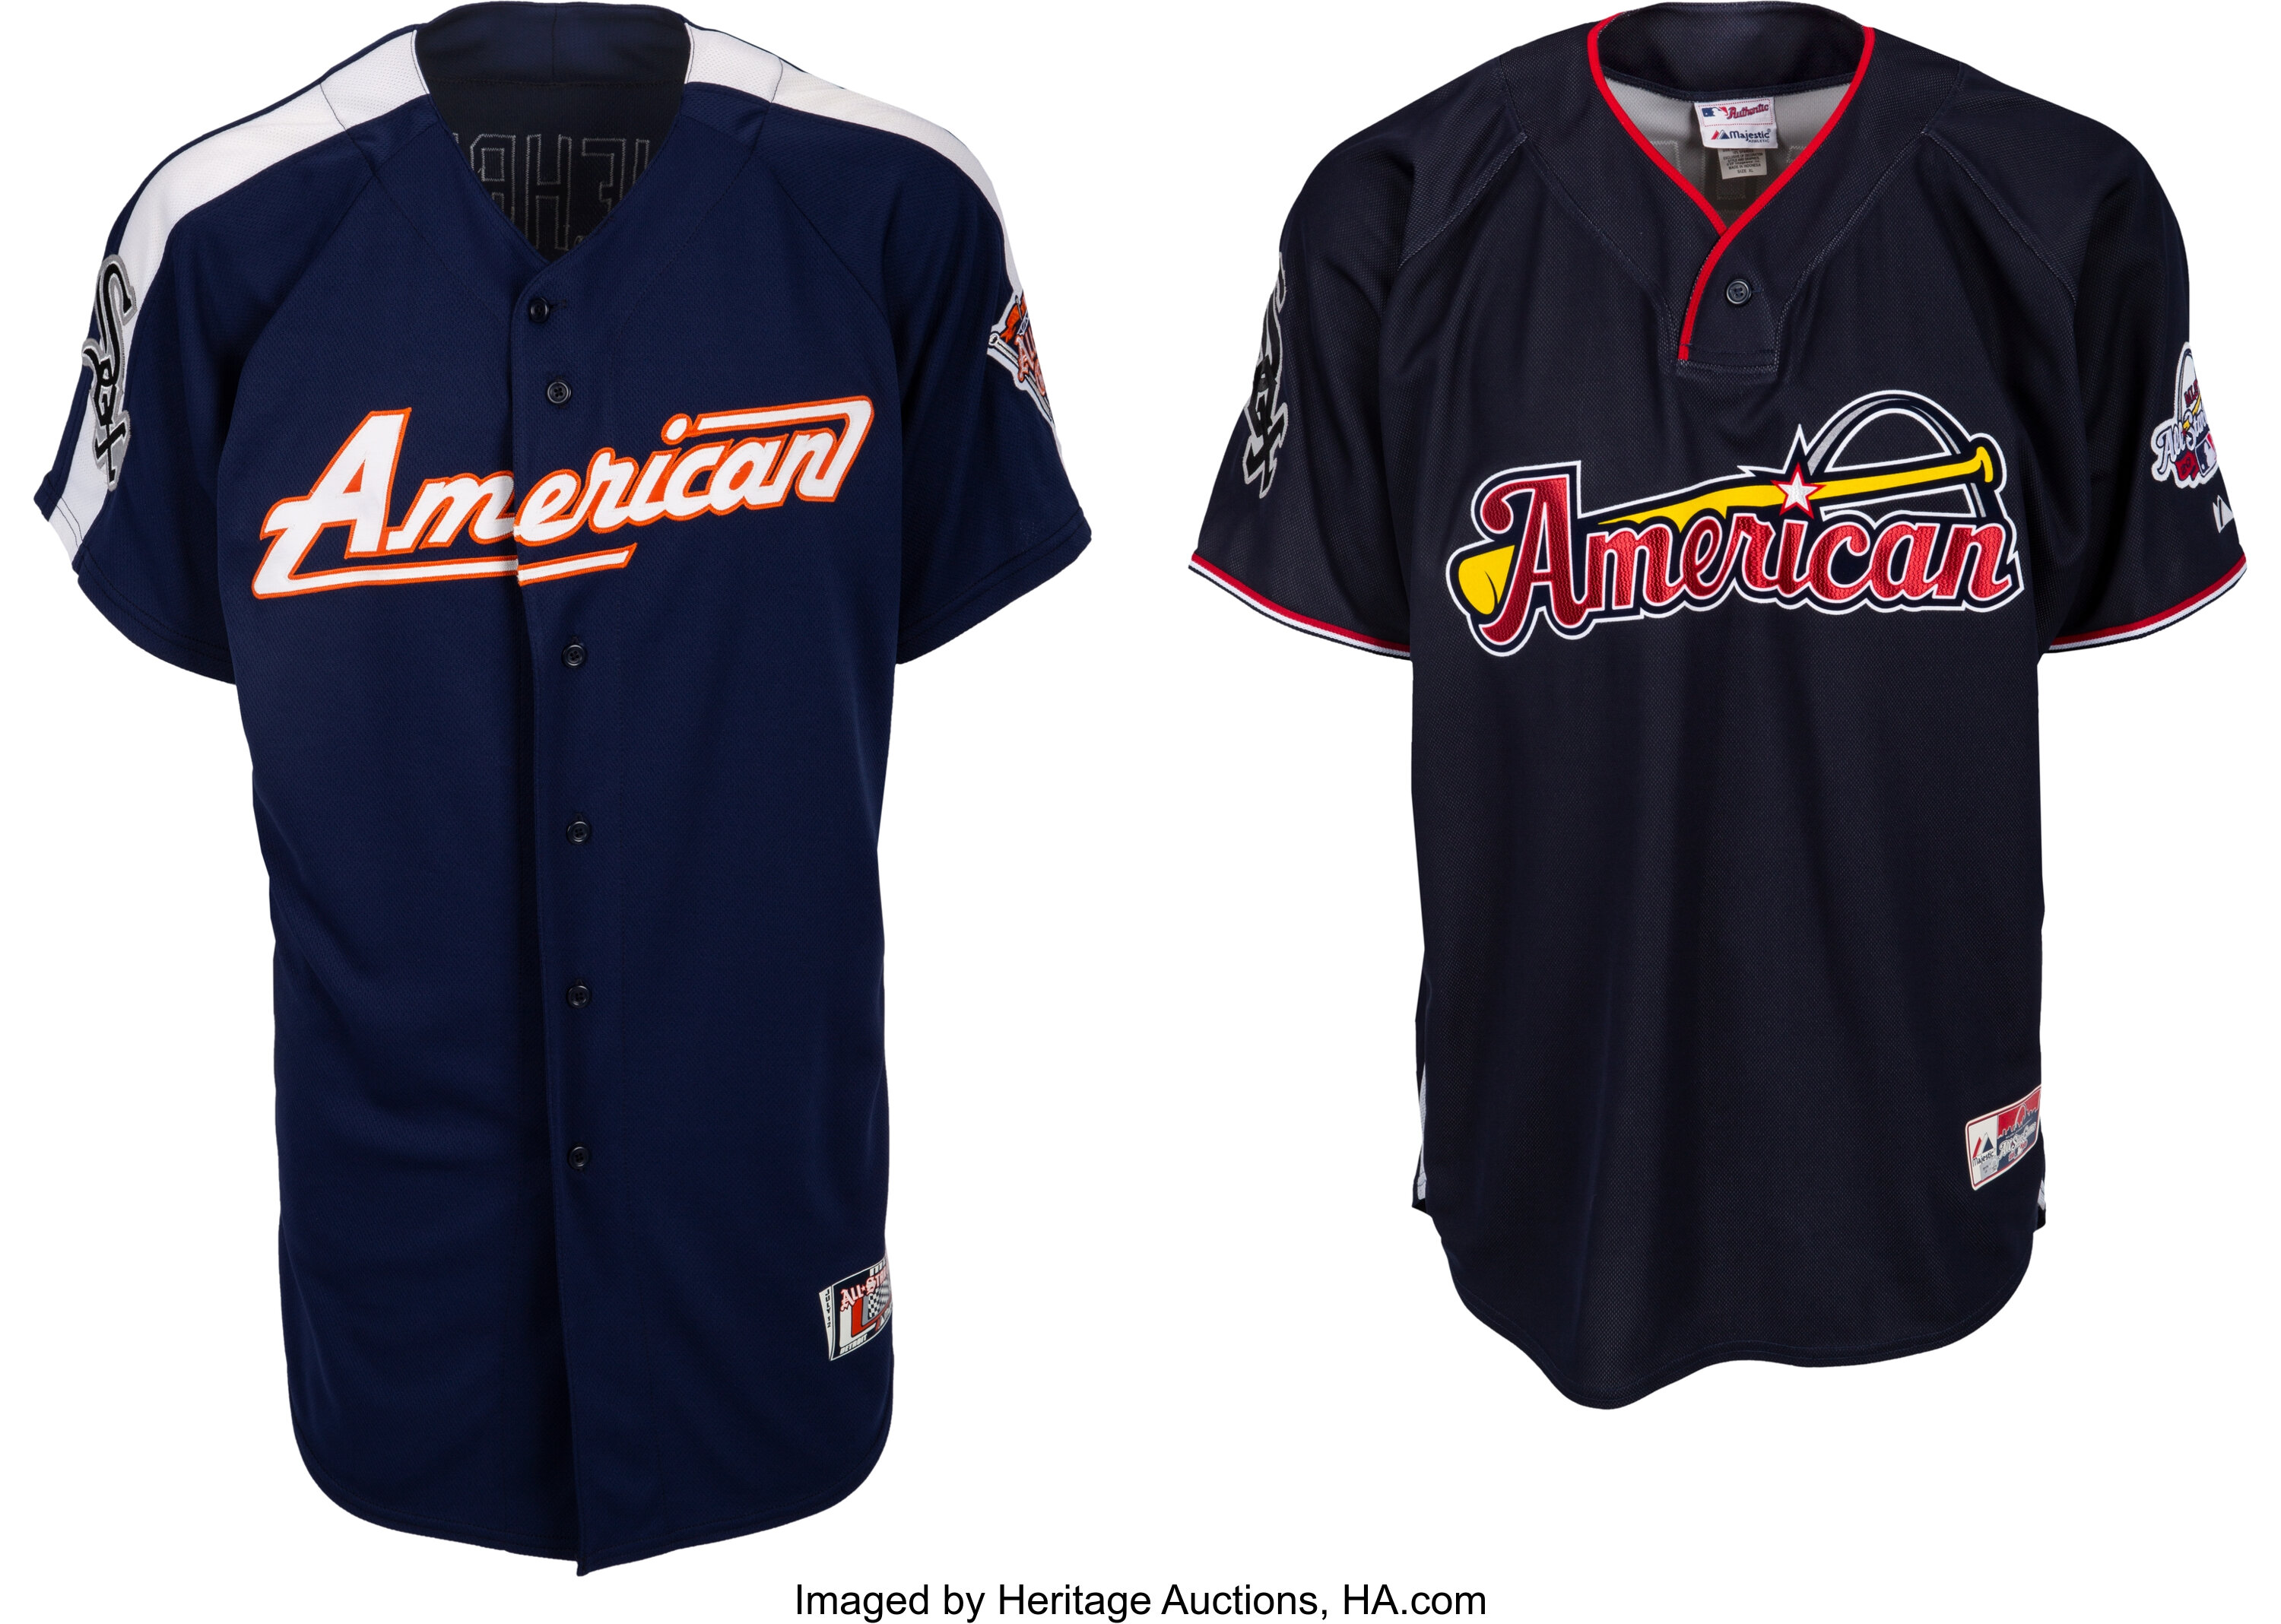 MLB All-Star Game jerseys: Check out this year's All-Star Game